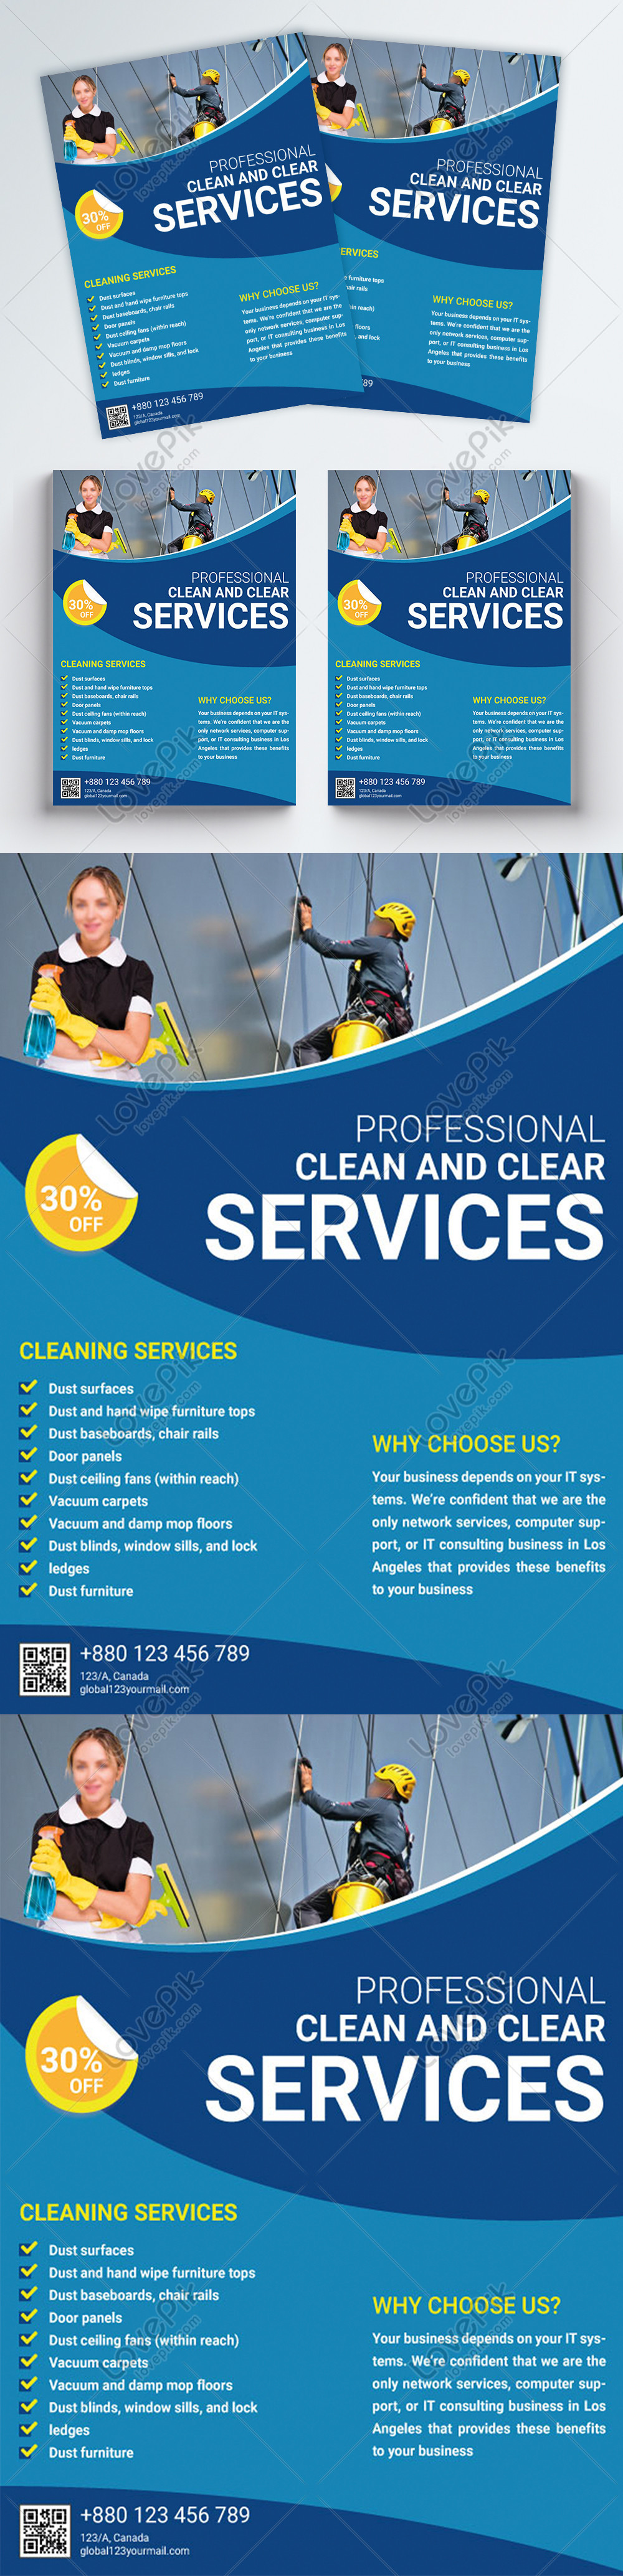 professional-cleaning-services-flyer-template-image-picture-free